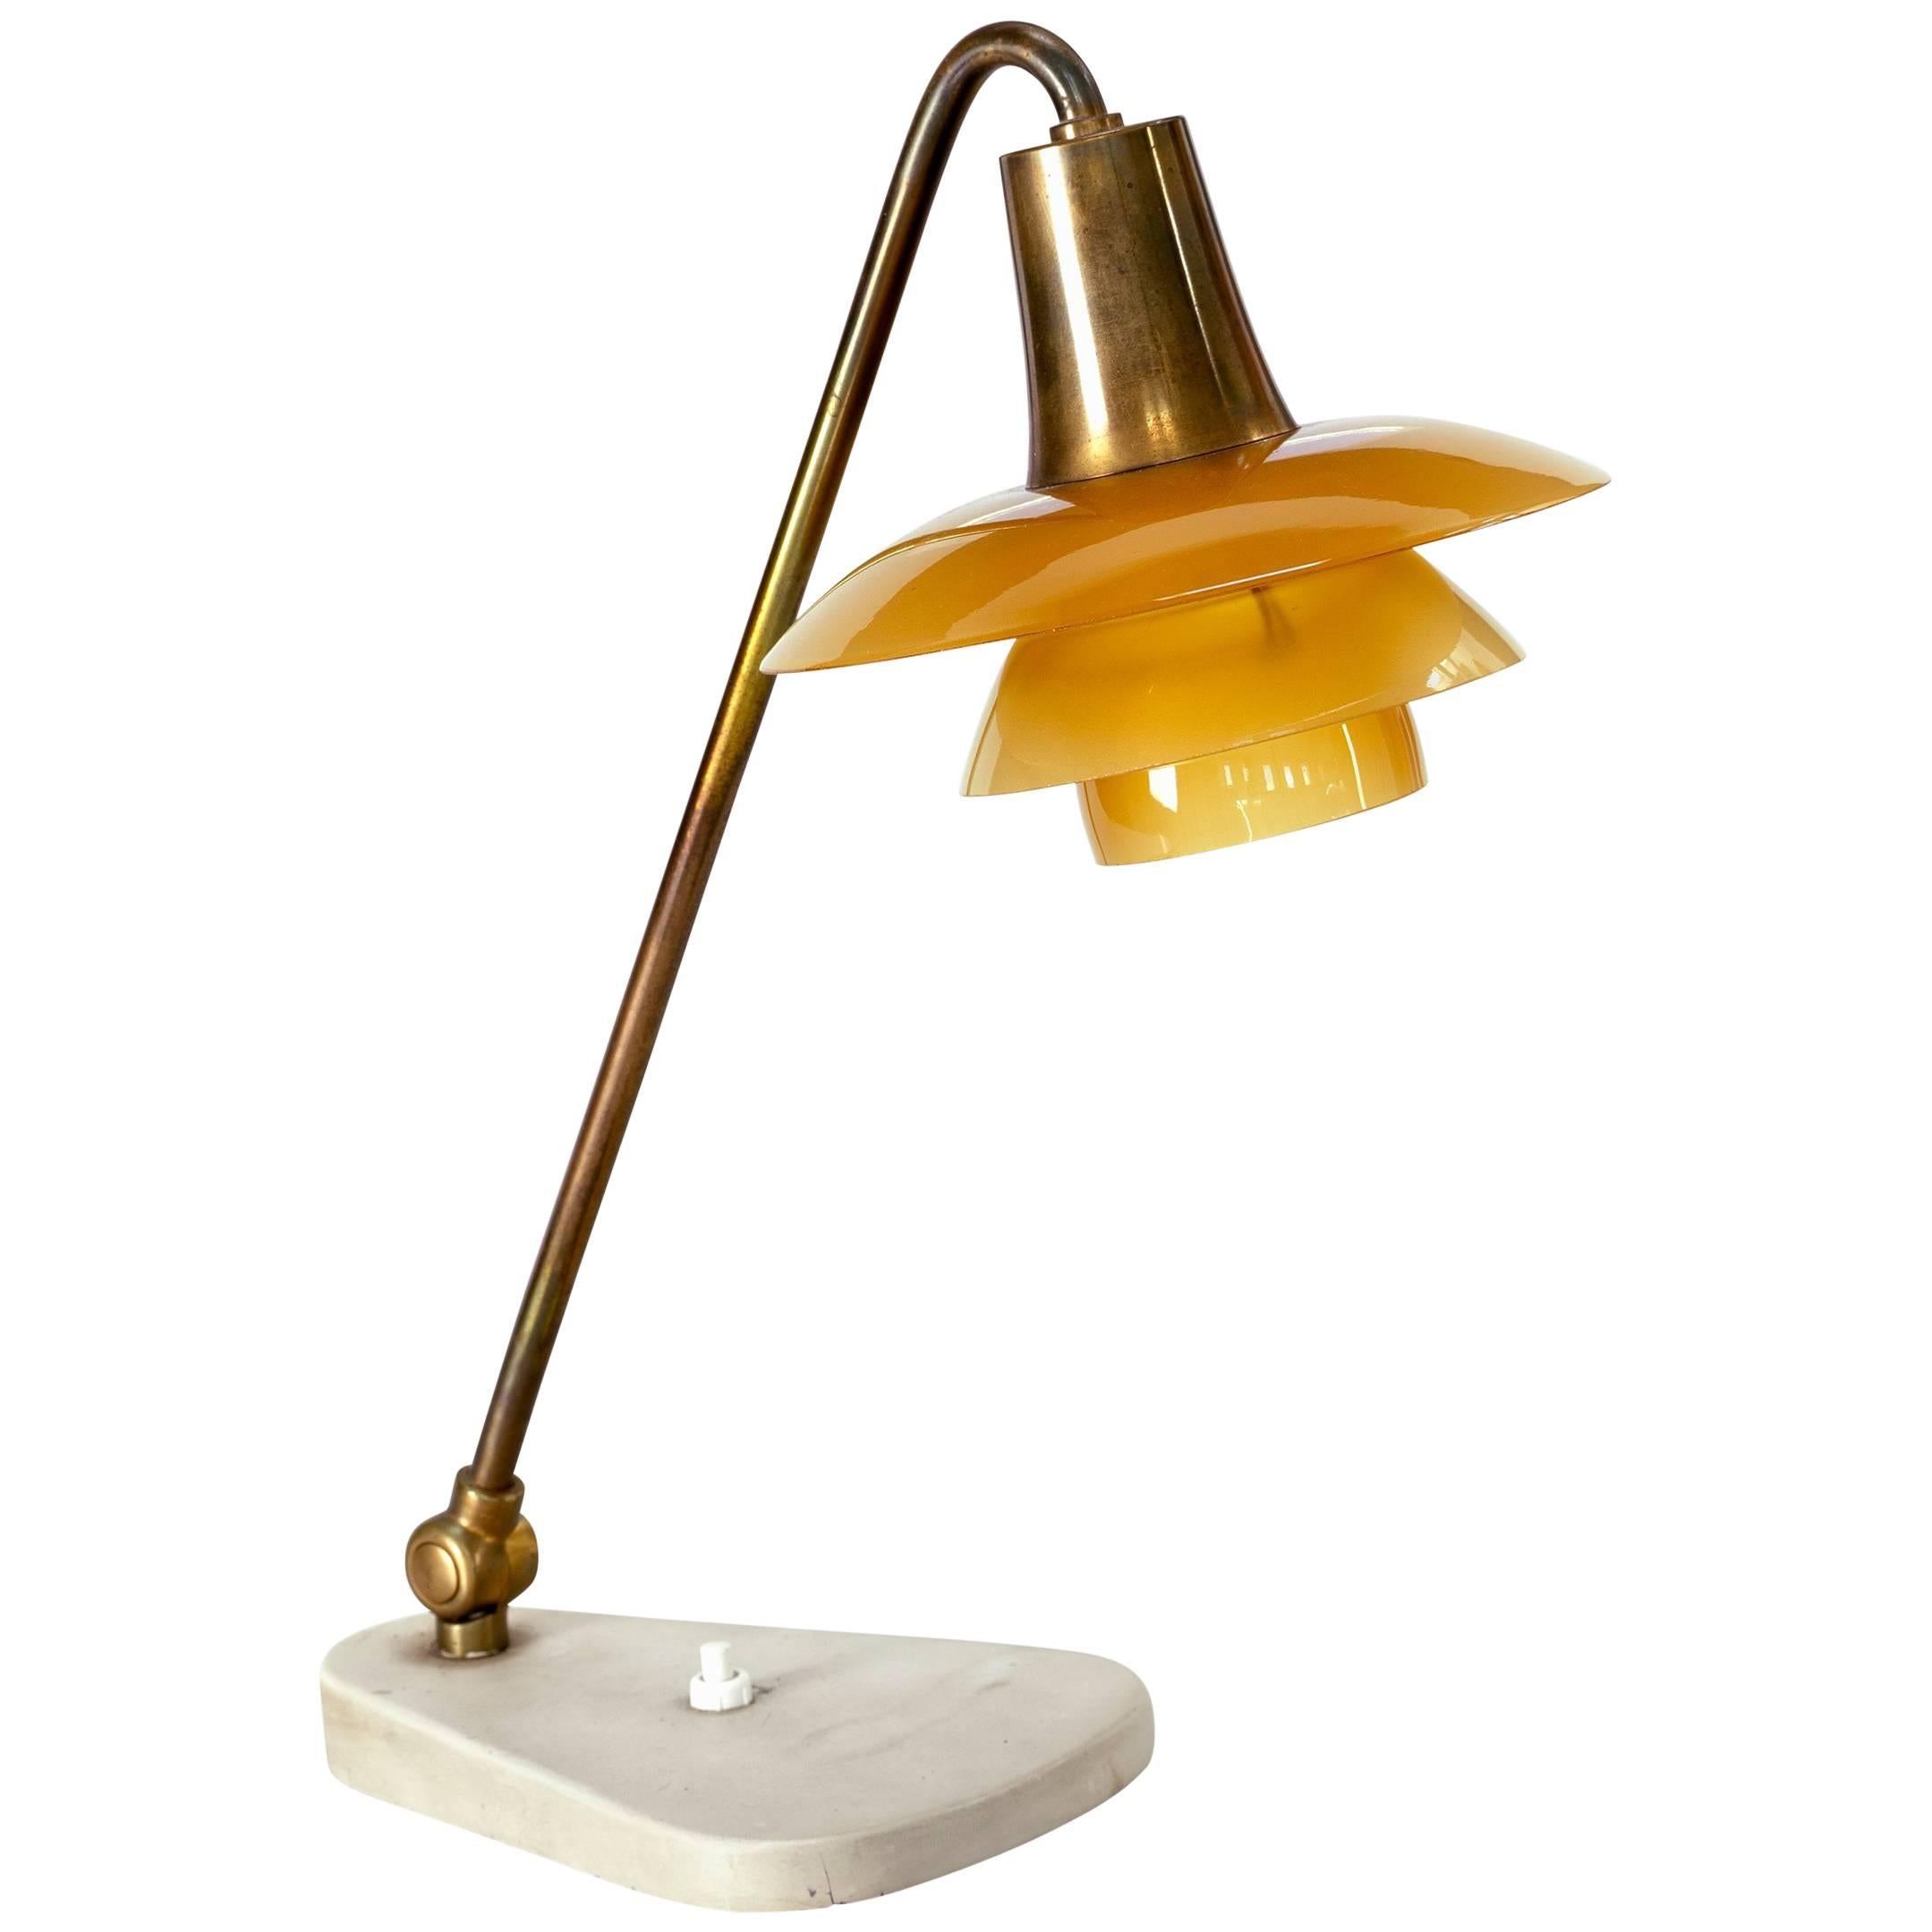 Ph 1/1 Piano Lamp by Poul Henningsen For Sale